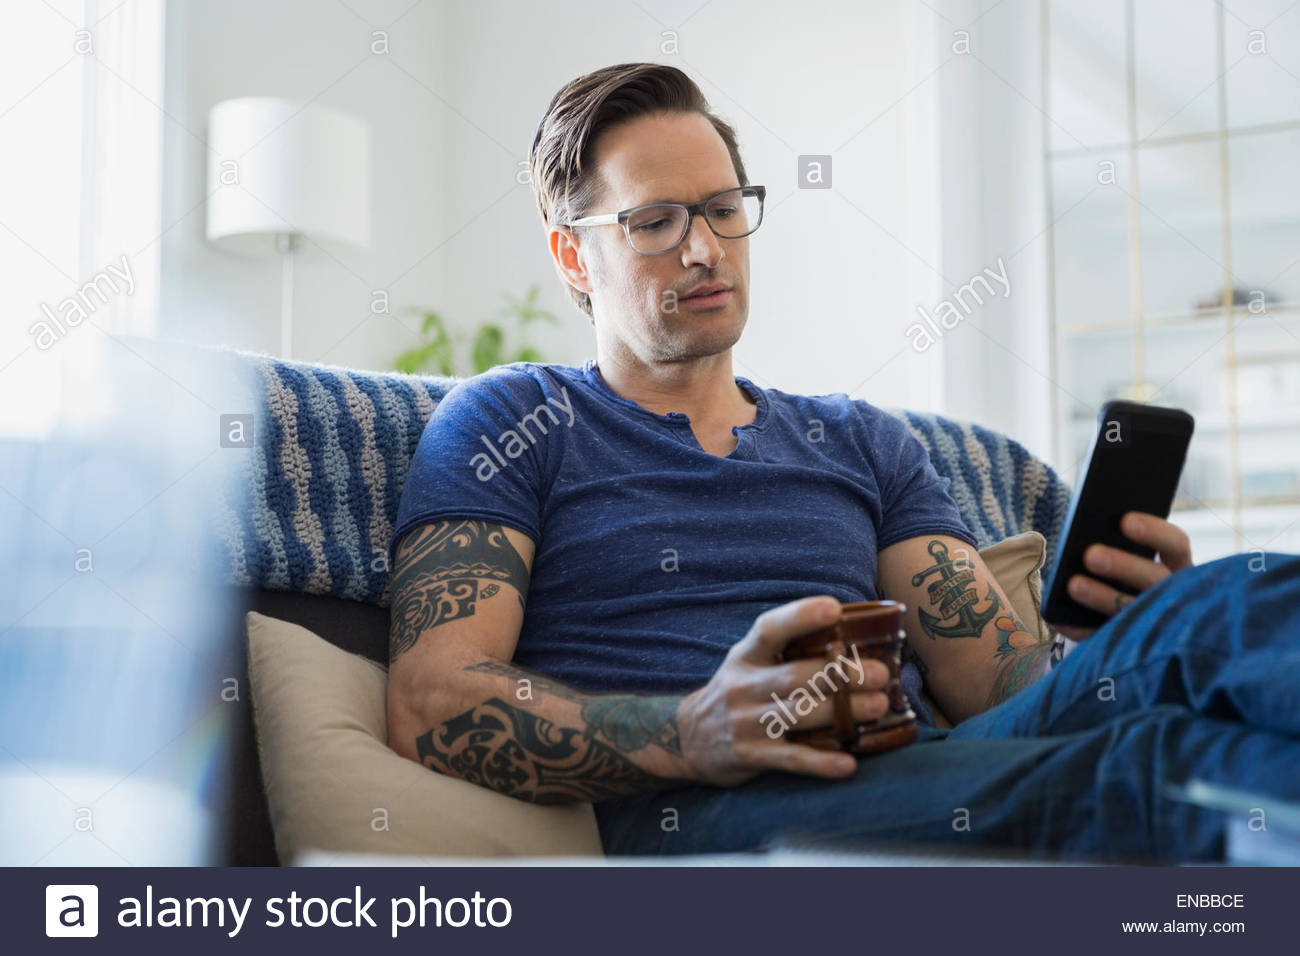 Man tattoos and coffee texting in living room Stock Photo